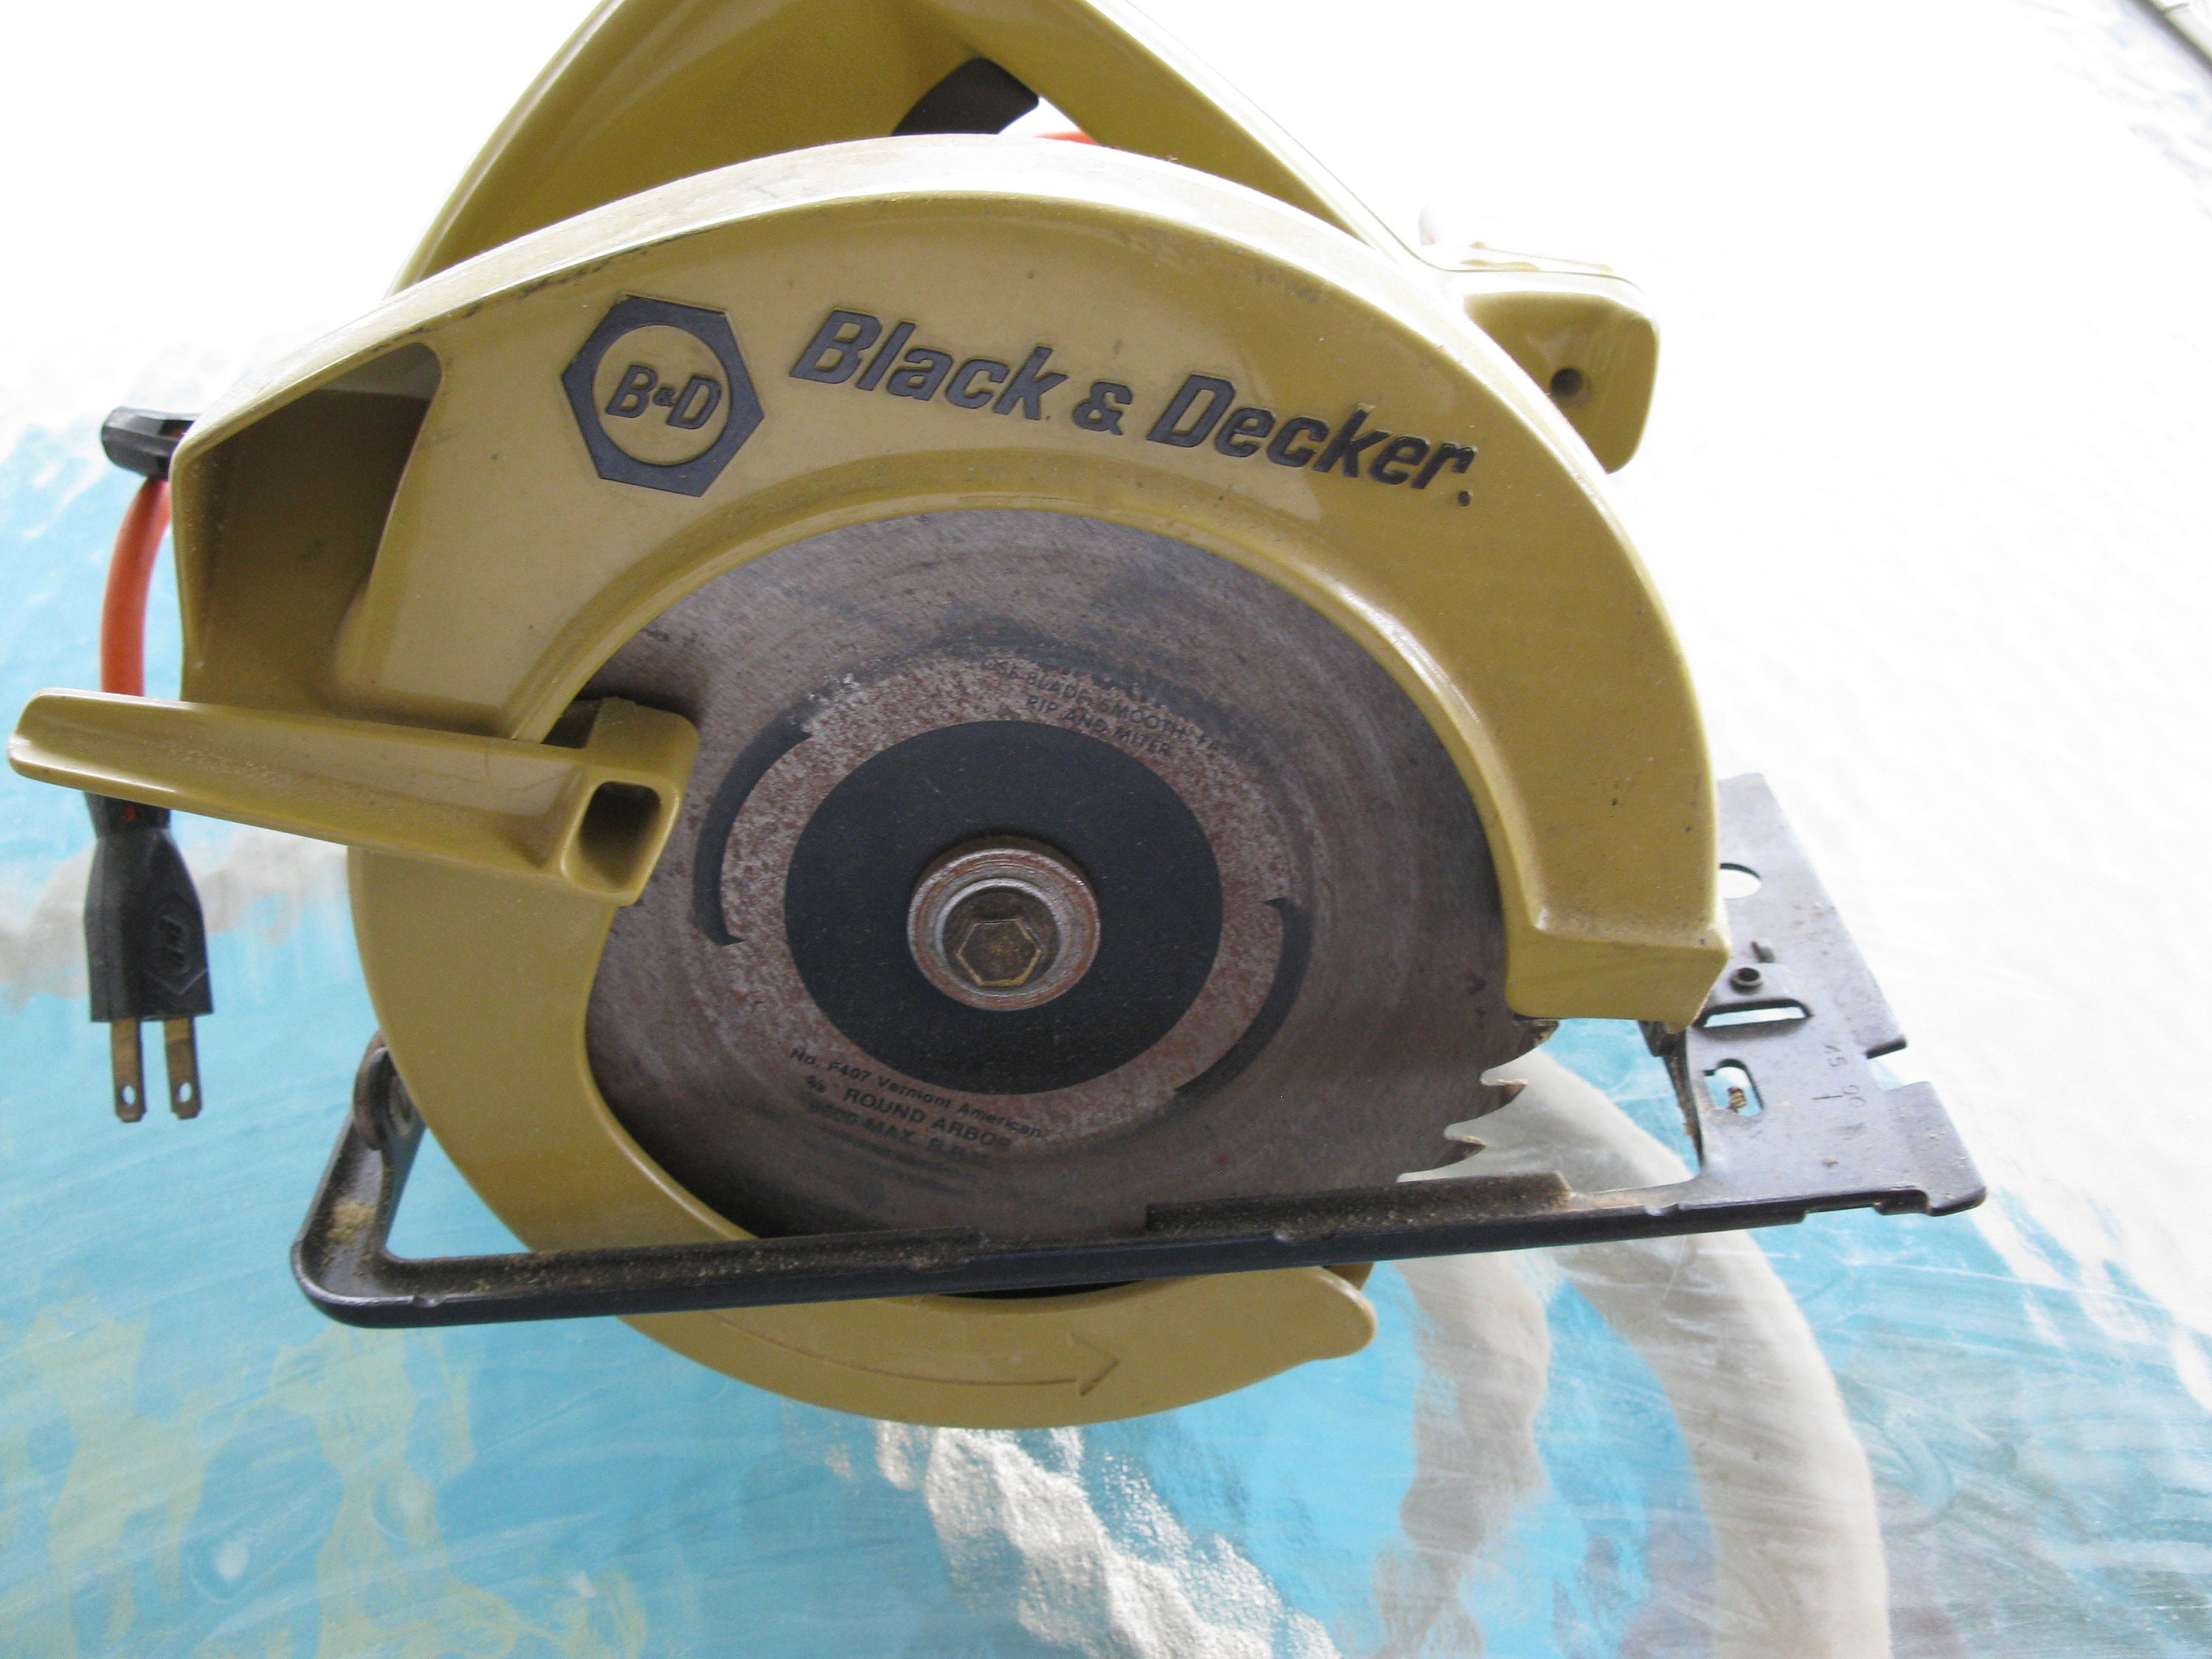 BLACK+DECKER CA - @joyandasher found his father's old BLACK+DECKER®  circular saw. Looking as good as it works. What's the oldest tool in your  collection? Show us using #BLACKANDDECKER.